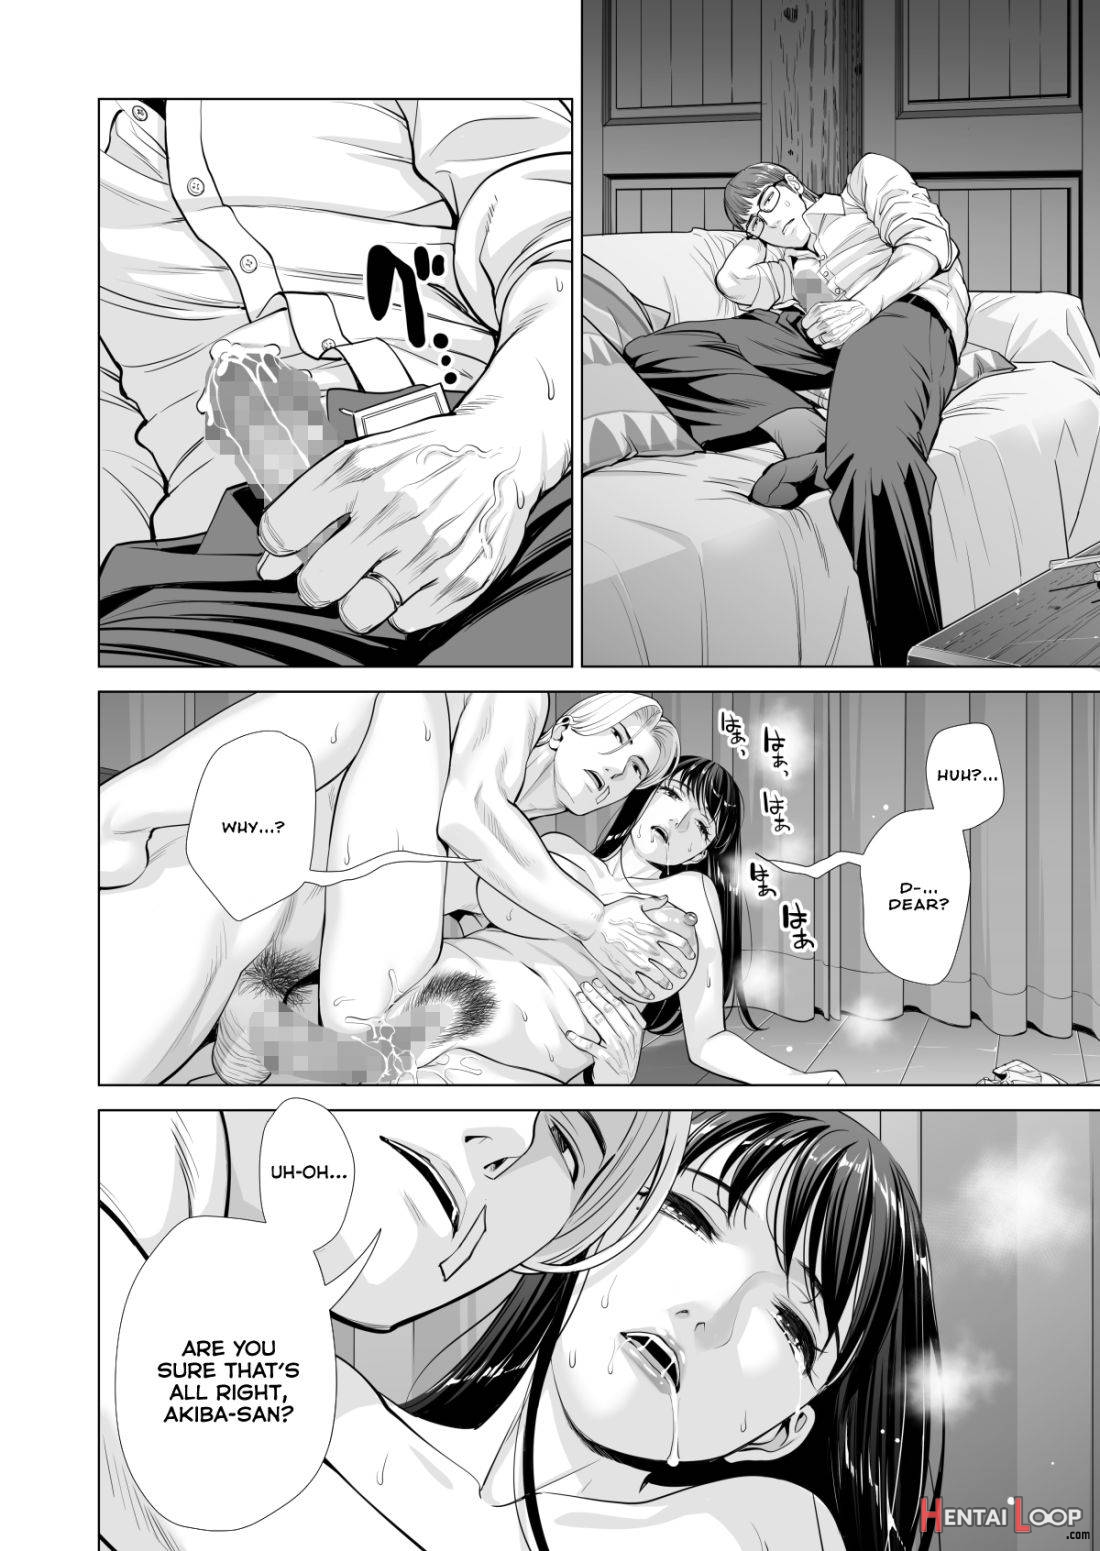 Tsukiyo no Midare Zake (Kouhen) Moonlit Intoxication ~ A Housewife Stolen by a Coworker Besides her Blackout Drunk Husband ~ Chapter 2 page 42